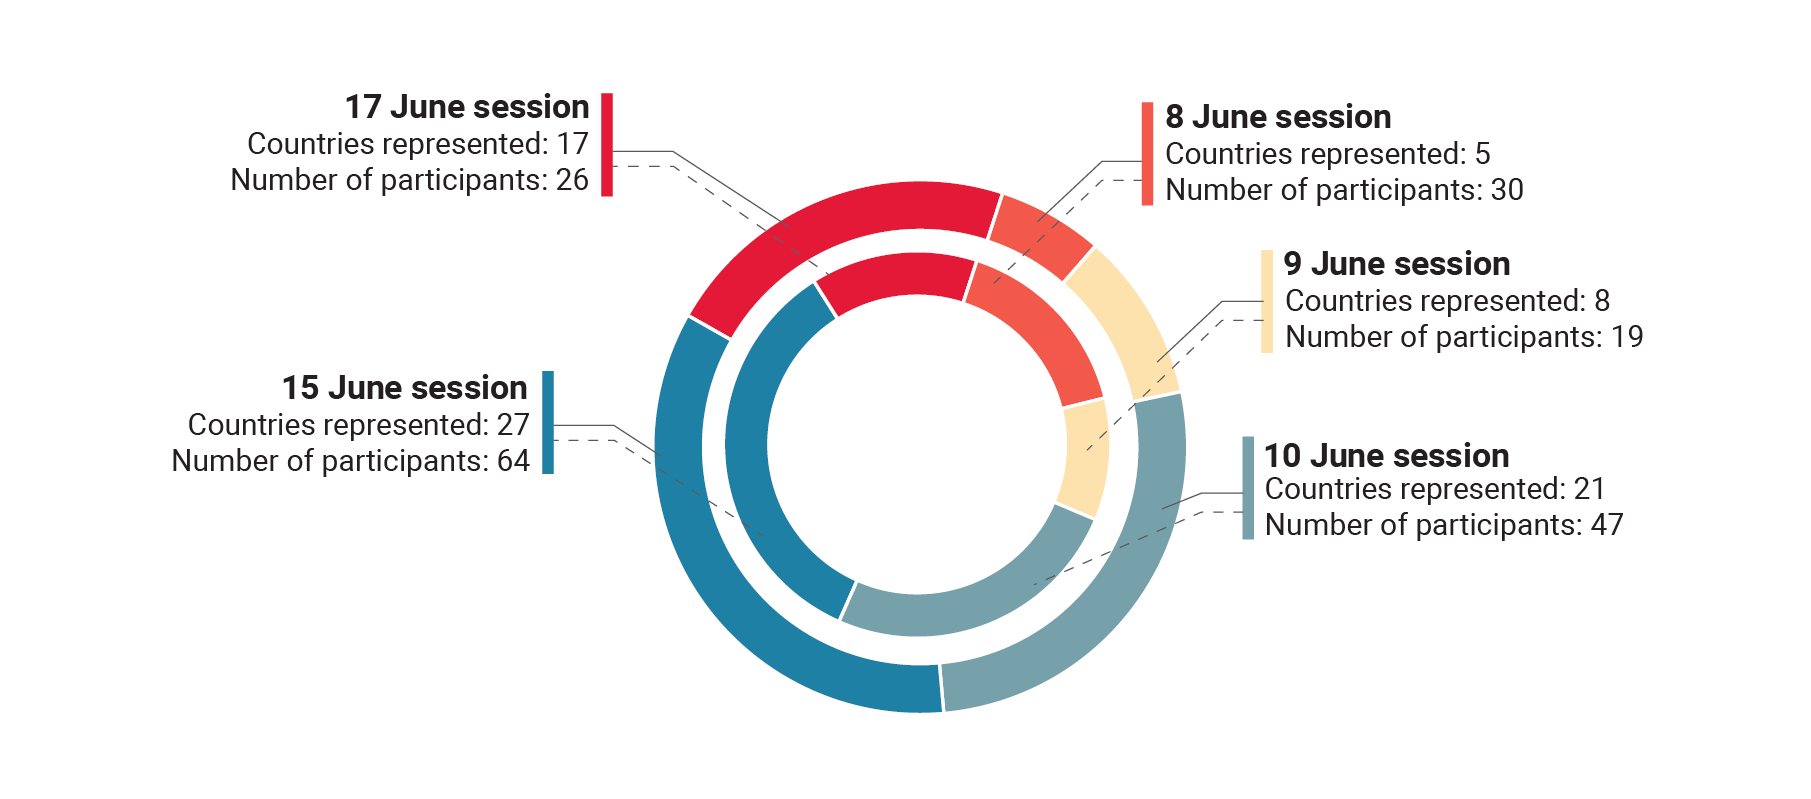 Donut charts showing numbers of countries represented and number of participants by session